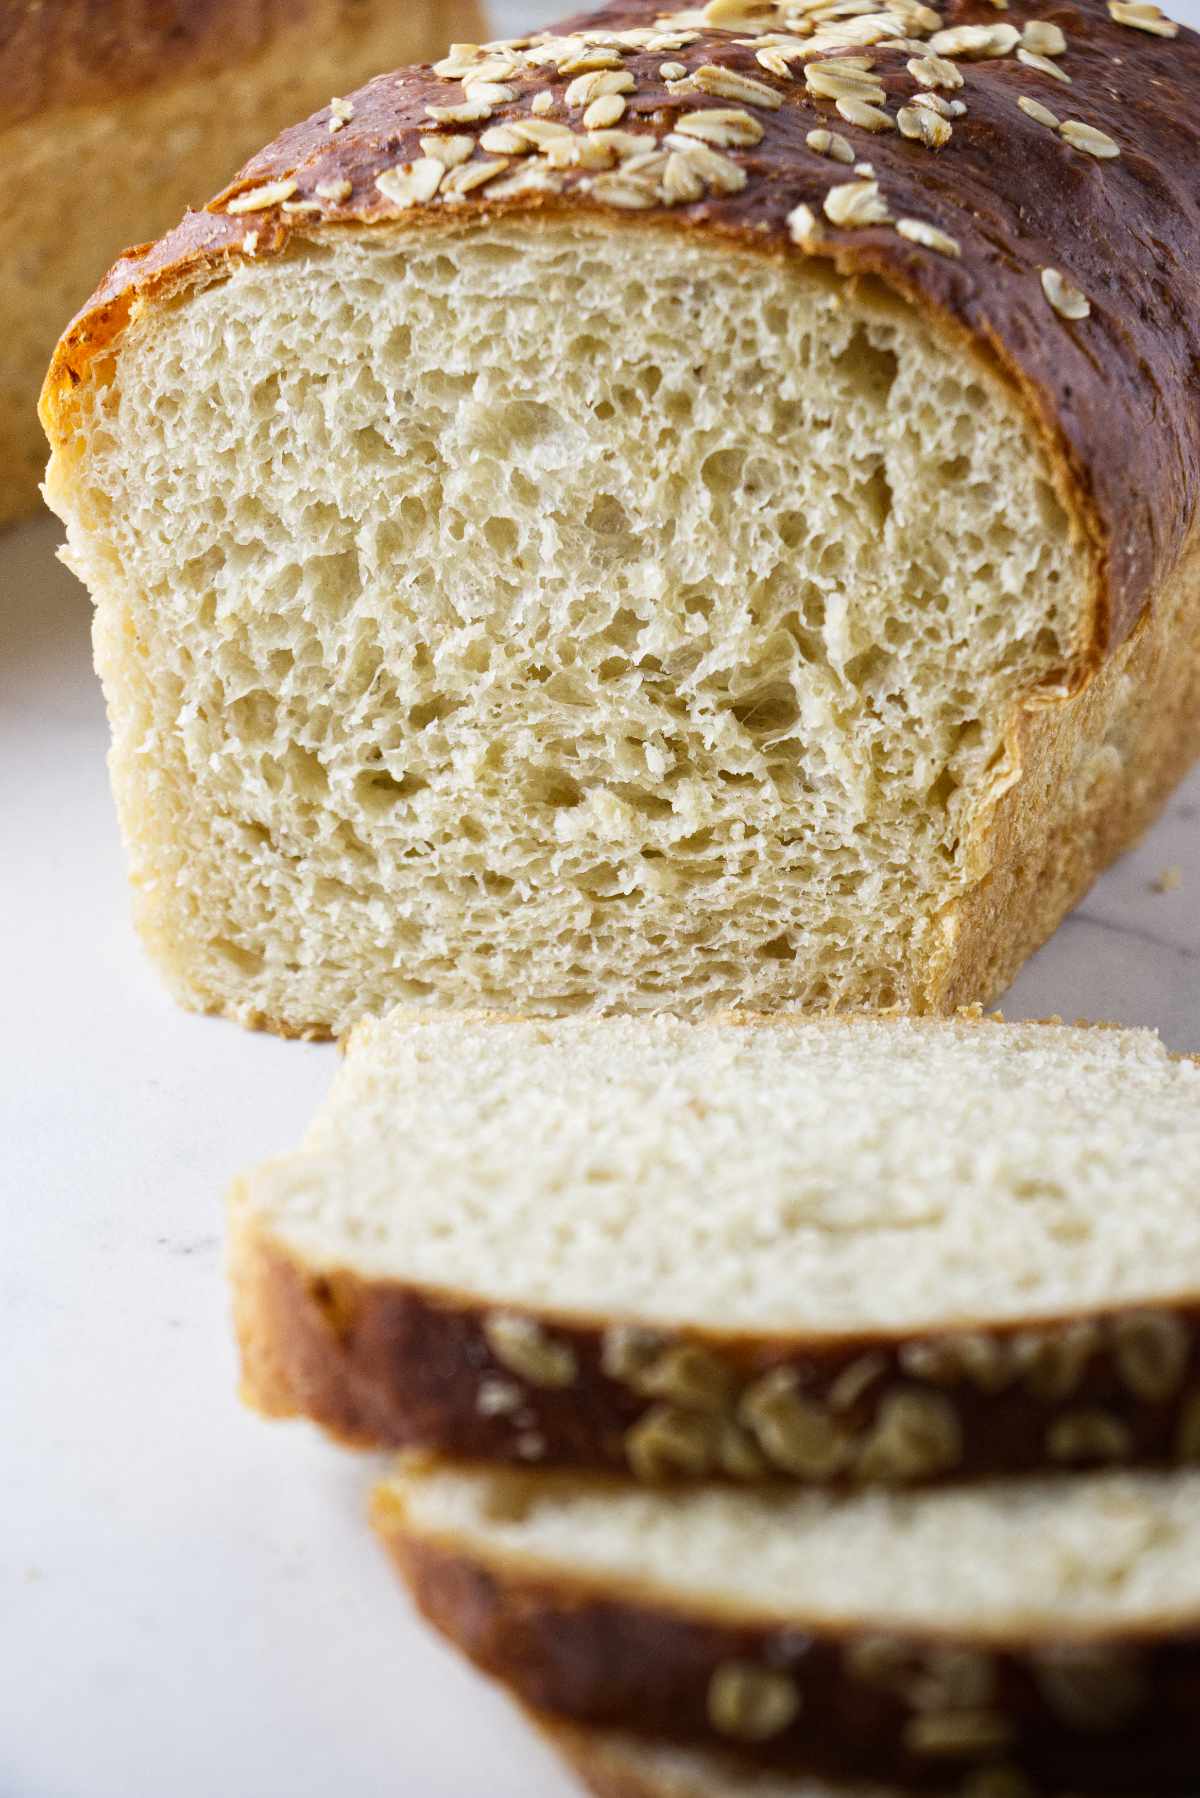 My first loaf ever.. and it's amazing! (Oatmeal bread) : r/BreadMachines